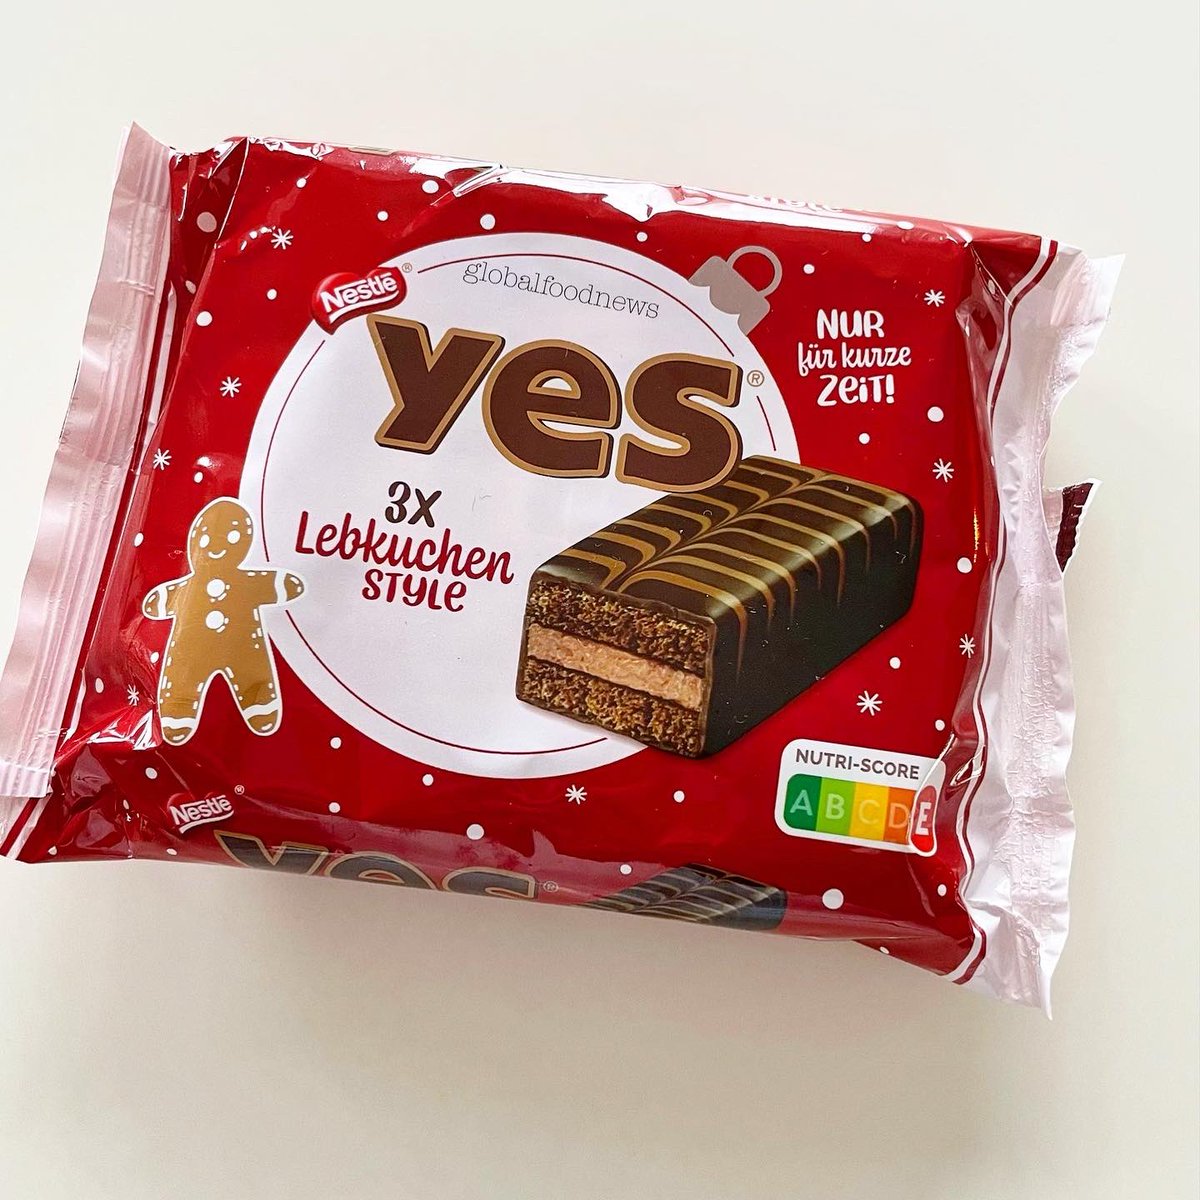 Global Food News on X: NEW • Limited Edition YES cake bar with ginger  bread flavour by Nestlé  #yes #yestörtchen  #yeslebkuchen #globalfoodnews  / X